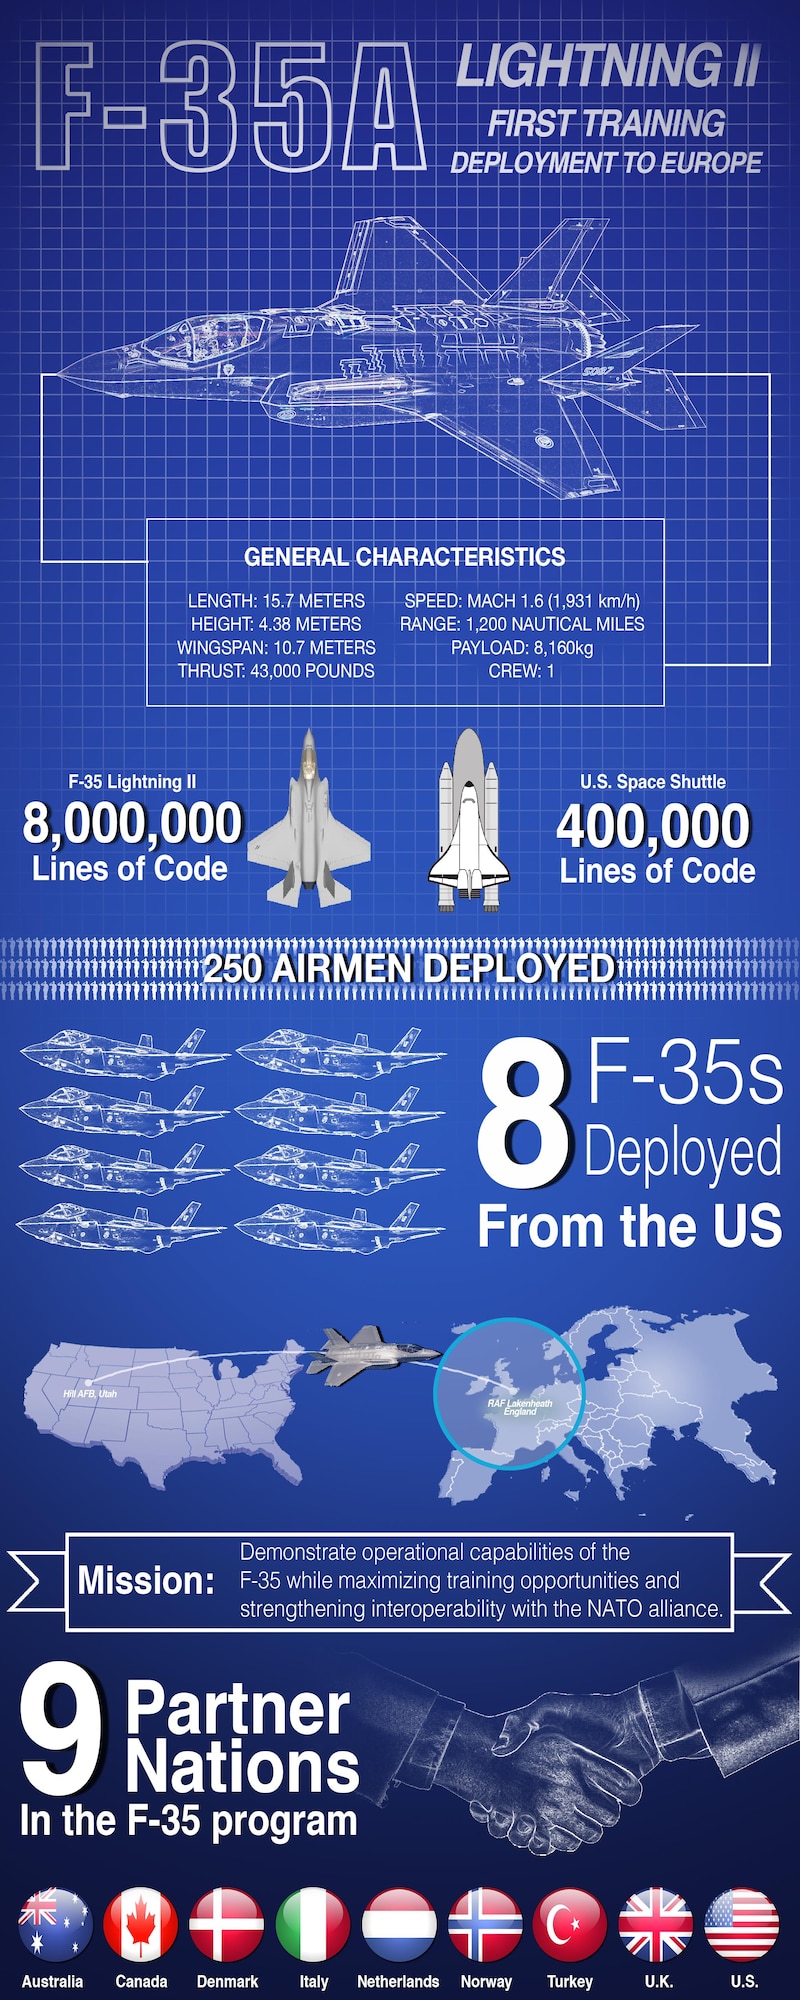 Characteristics and breakdown of the F-35A's first training deployment to Europe. (U.S. Air Force graphic by TSgt. Ryan Crane)